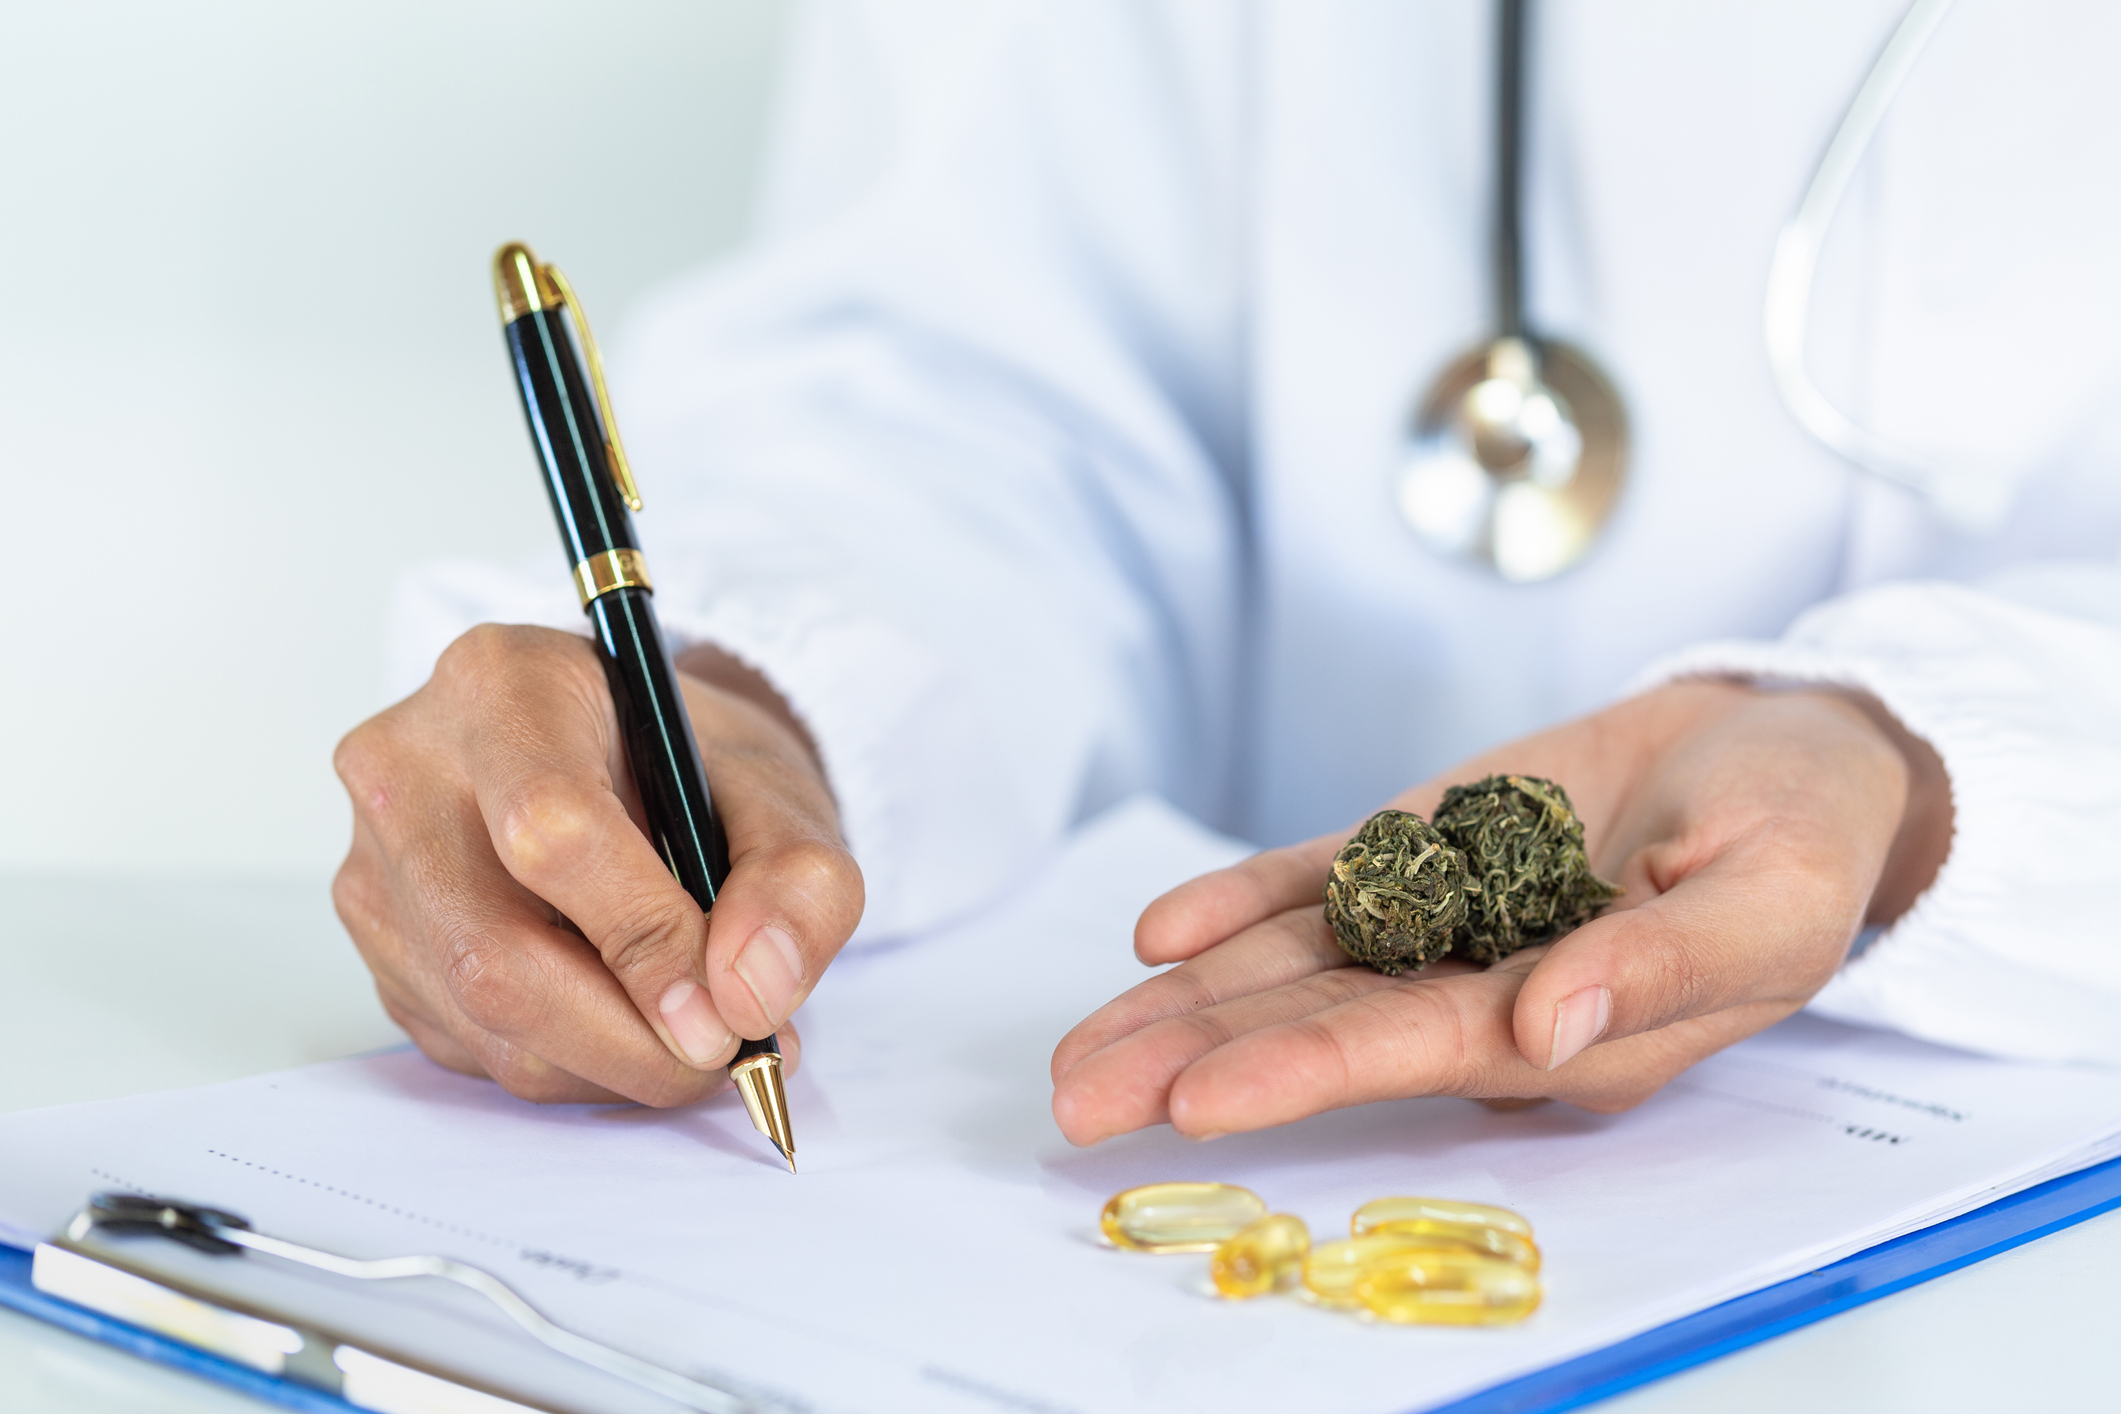 Medical conditions treated with cannabis in the UK